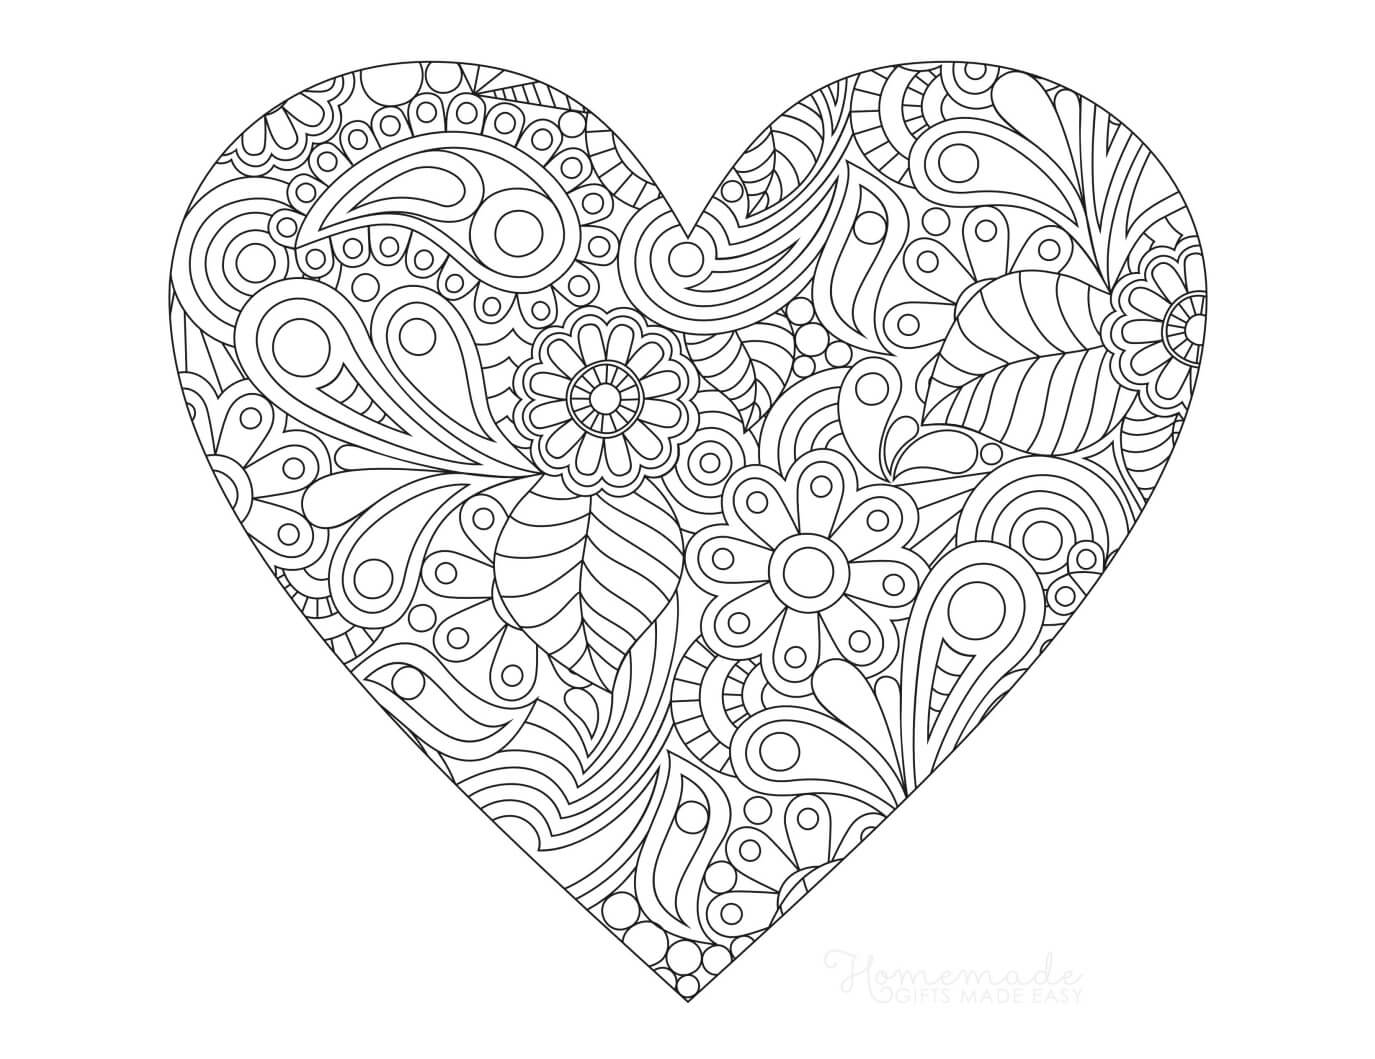 Printable heart coloring pages for adults